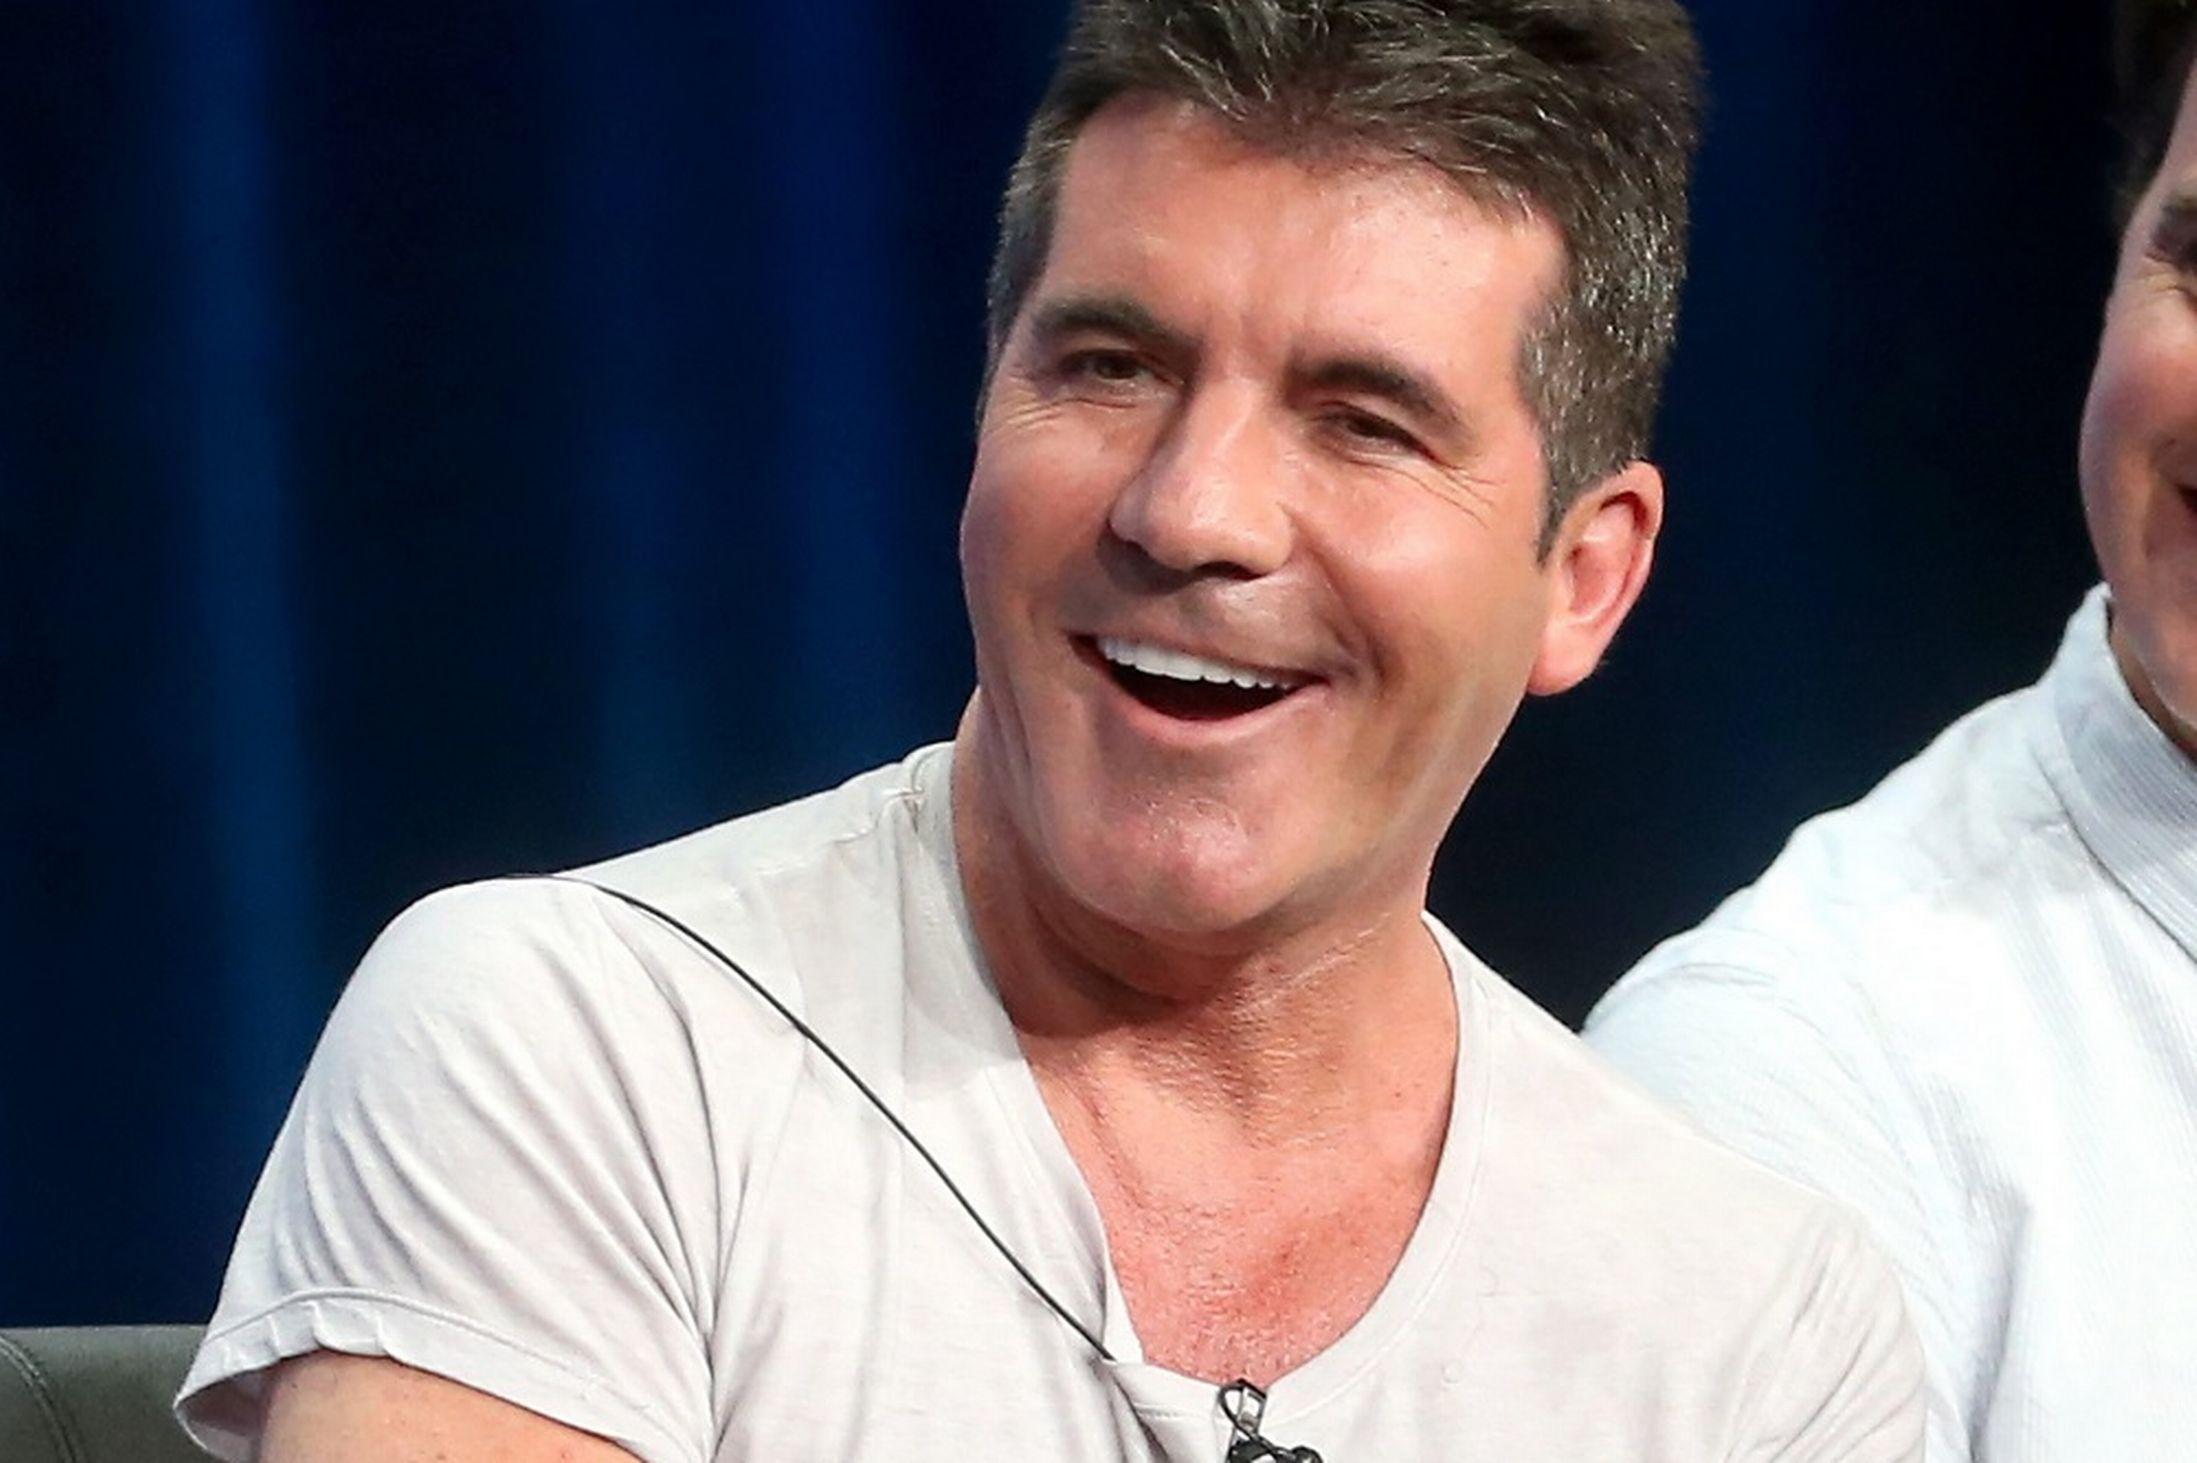 I don't mean to be rude but. The Simon Cowell is the TV